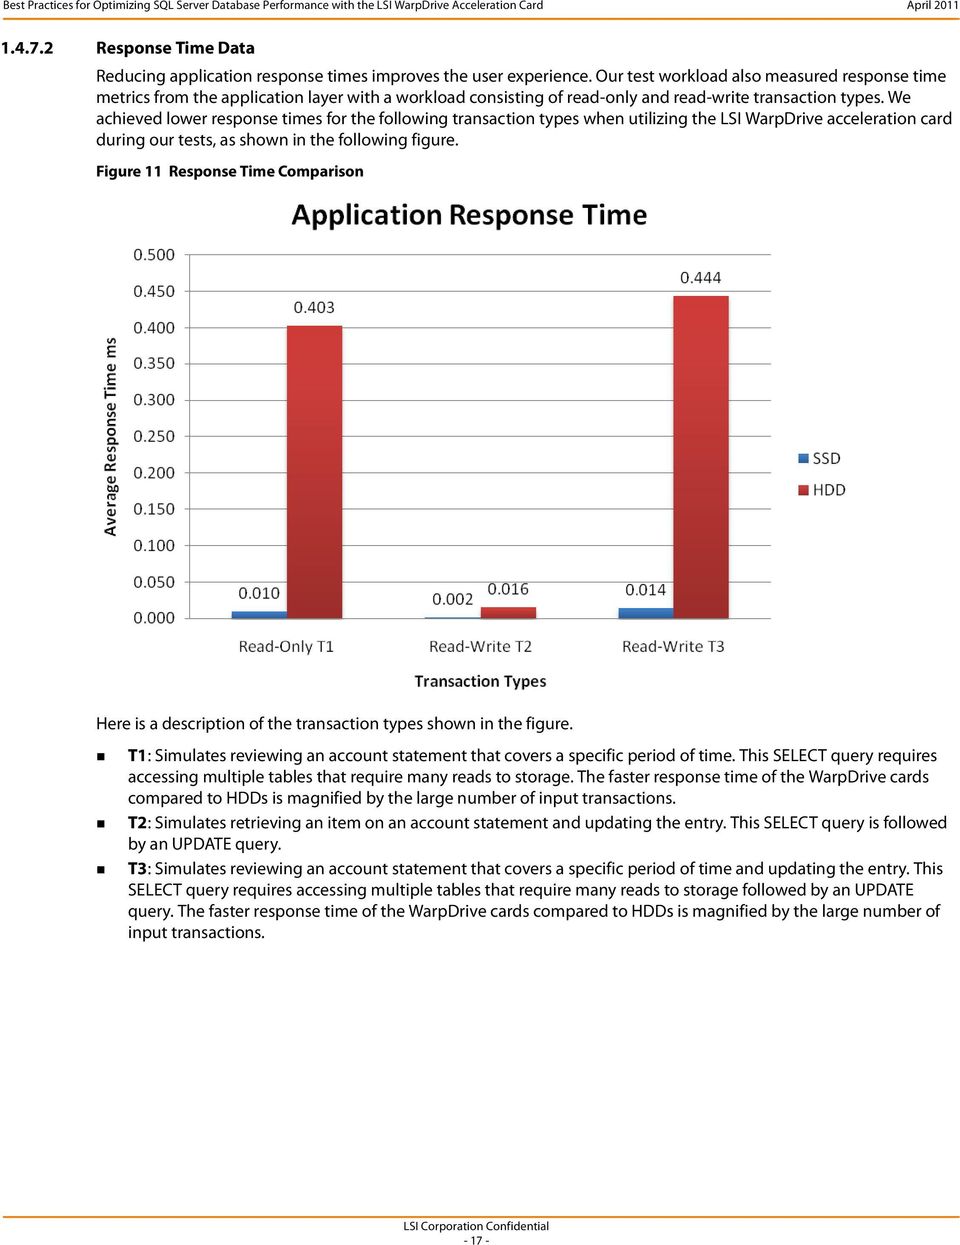 We achieved lower response times for the following transaction types when utilizing the LSI WarpDrive acceleration card during our tests, as shown in the following figure.